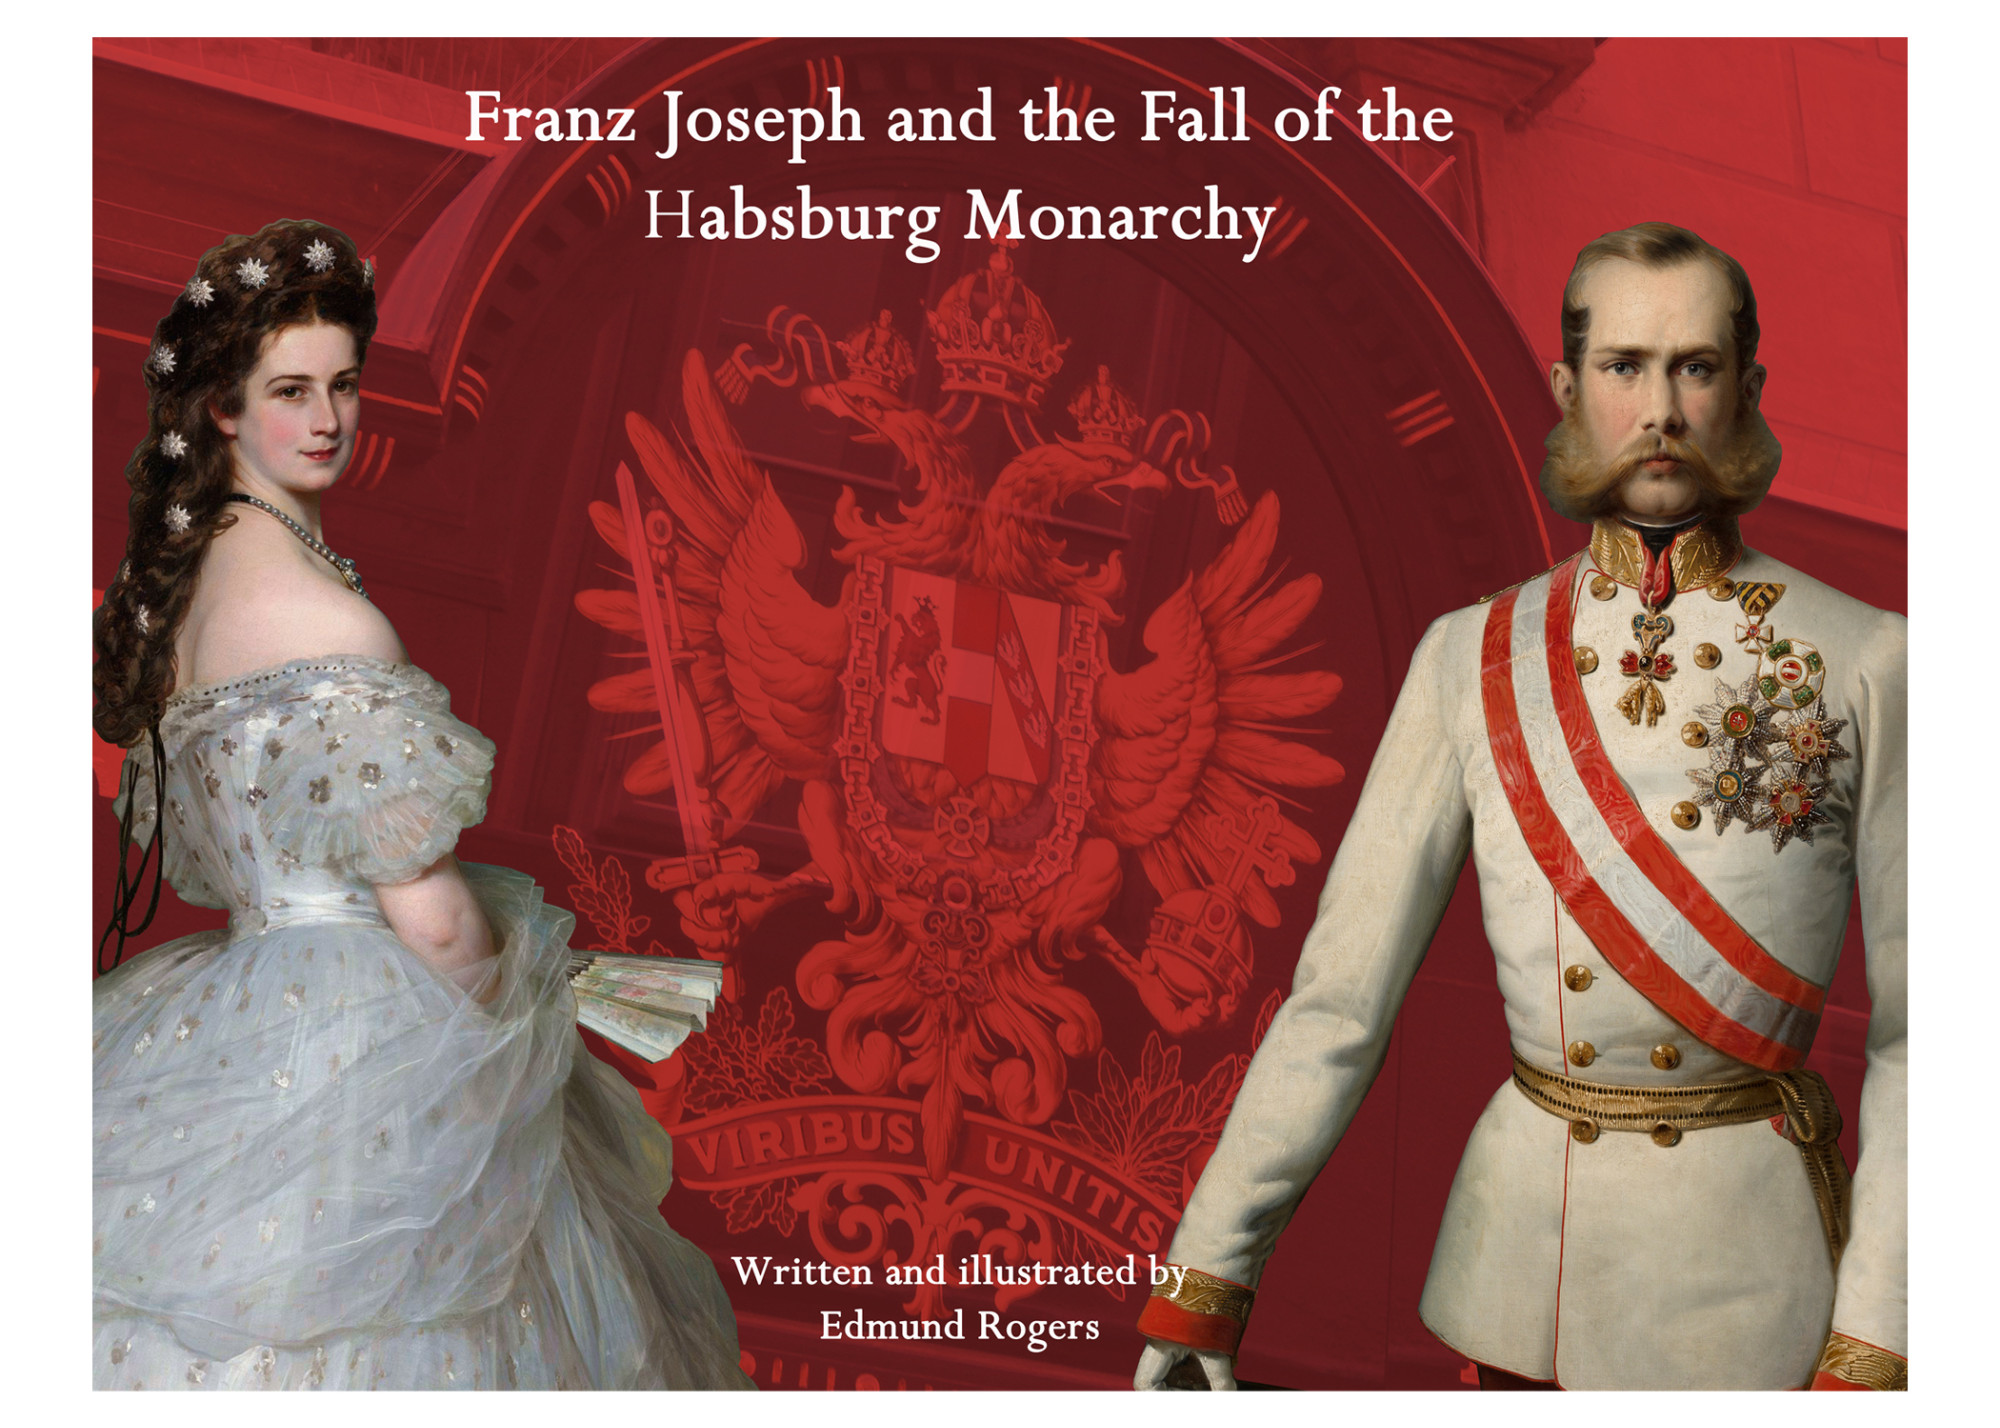 Front cover from the book "Franz Joseph and the Fall of the Habsburg Monarchy", Edmund Rogers